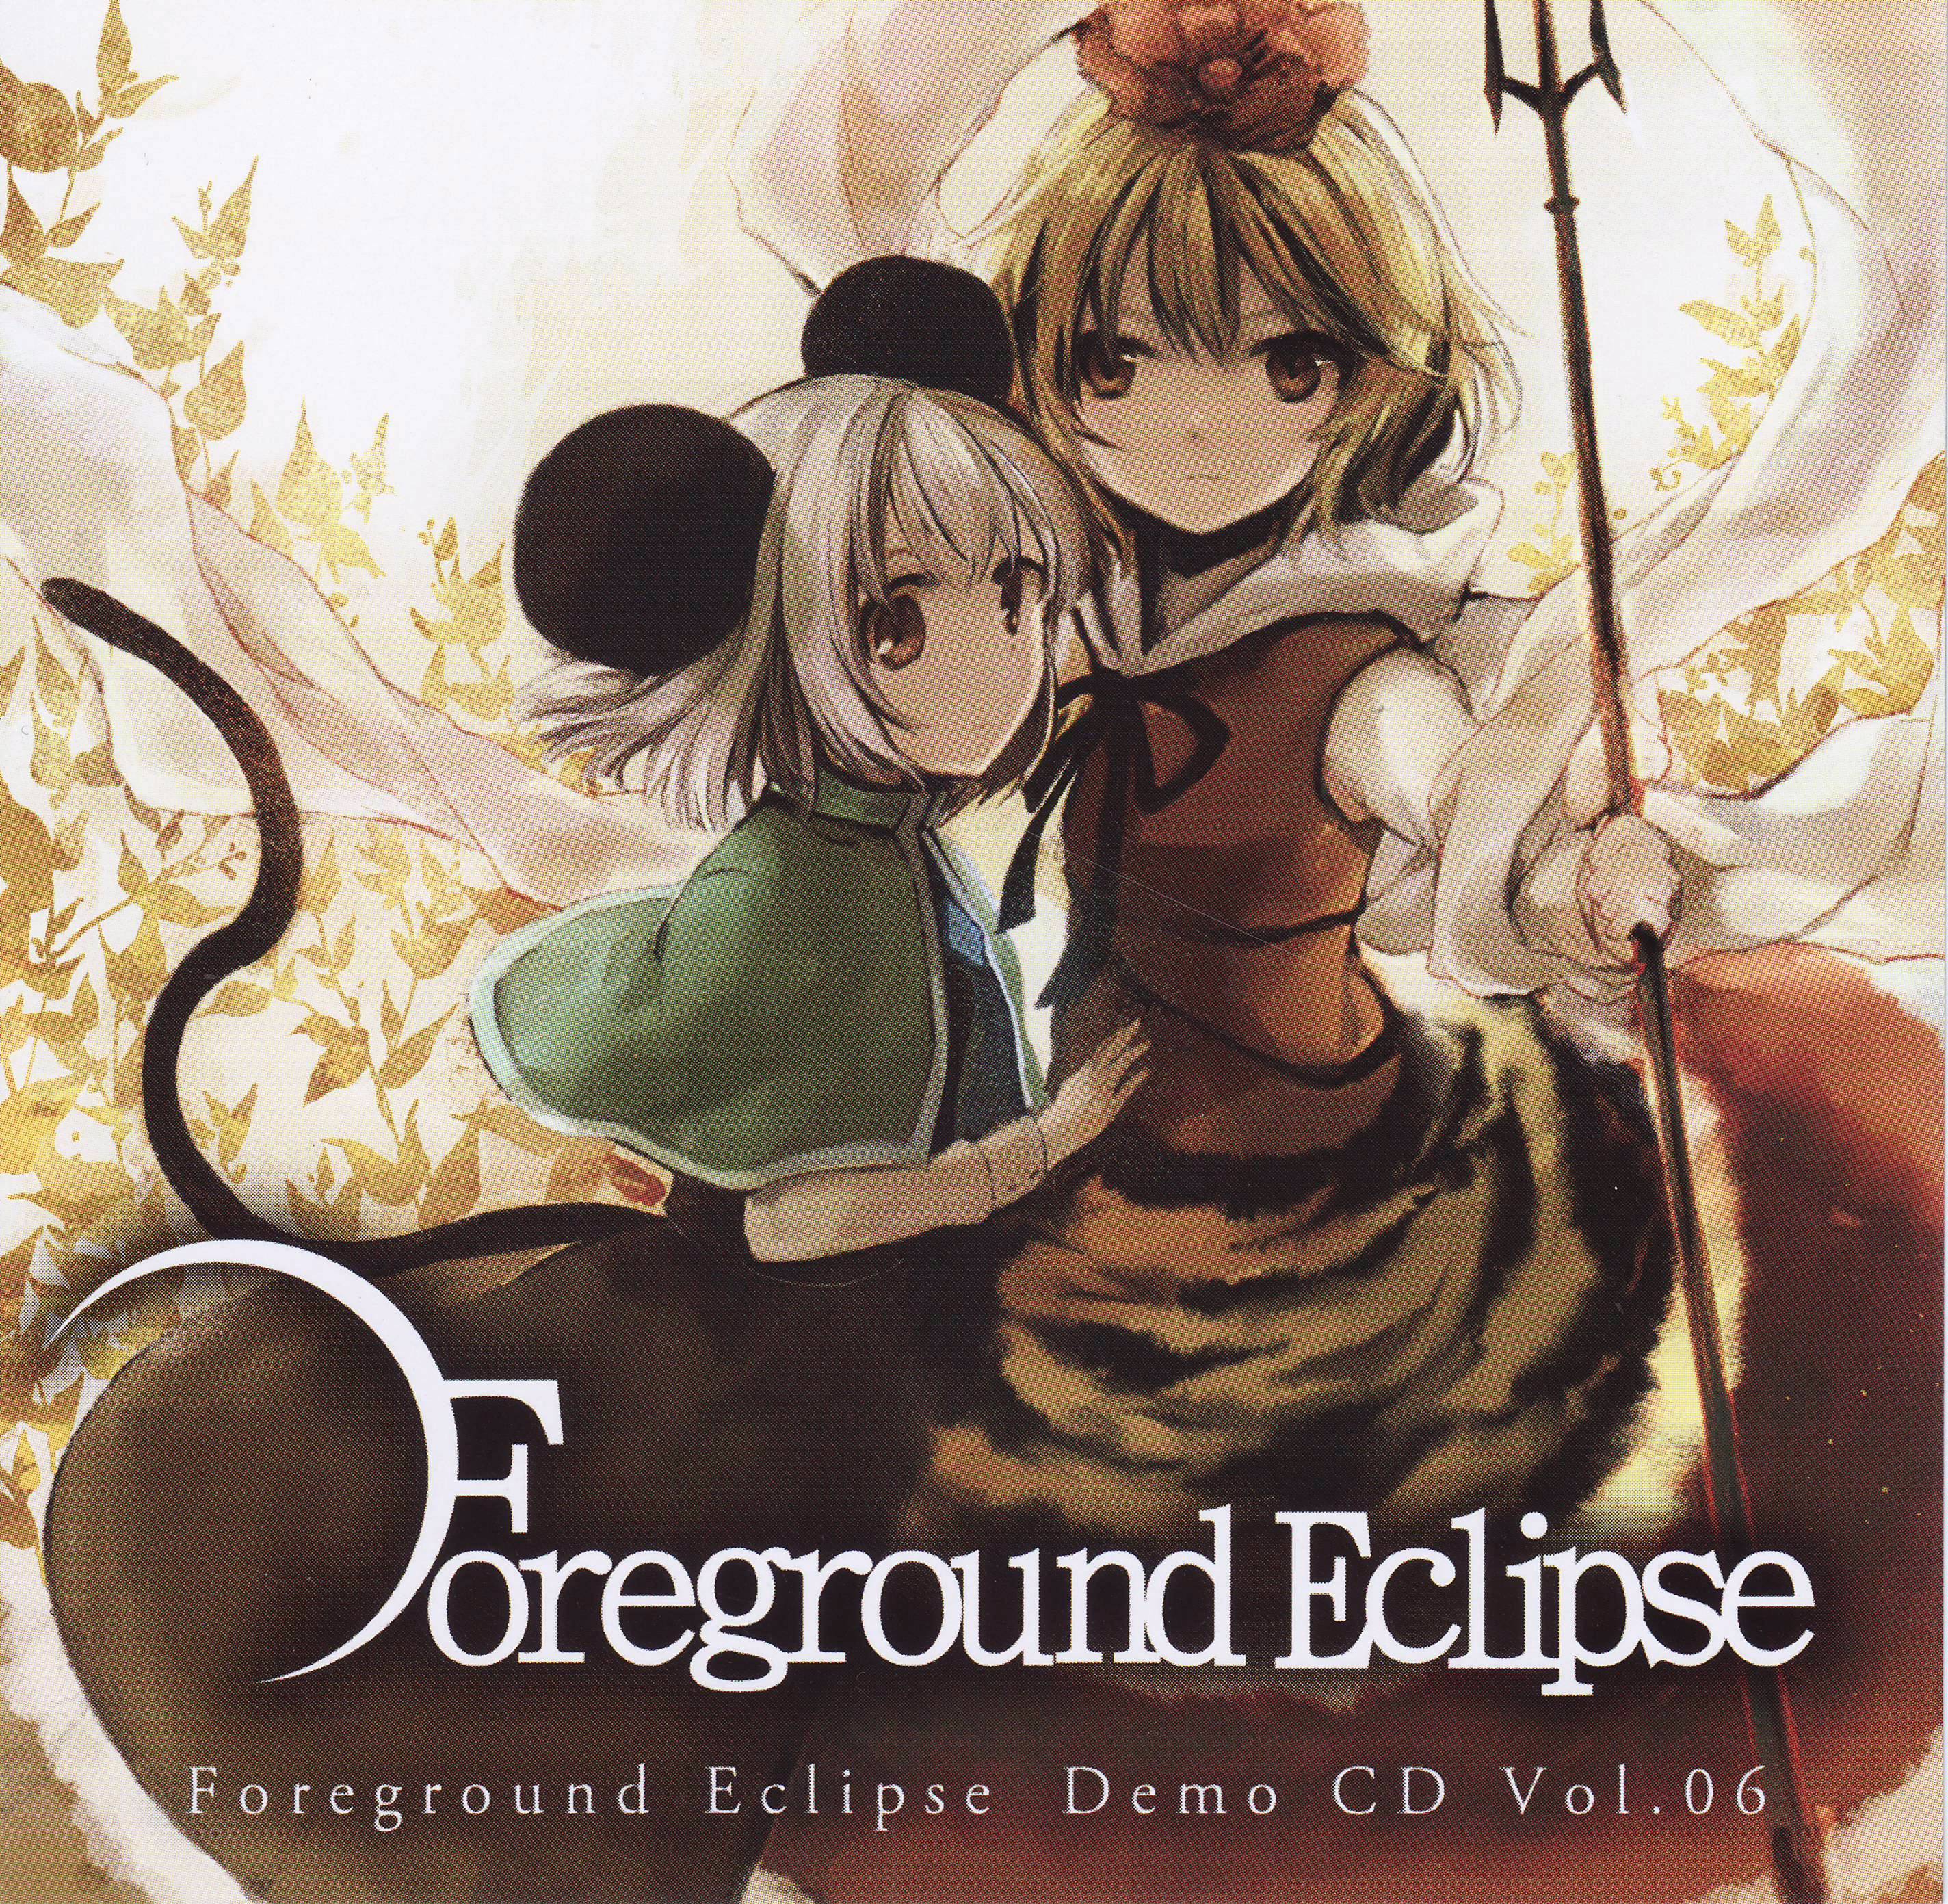 Foreground Eclipse Demo CD Vol.06 - てと, Foreground Eclipse feat